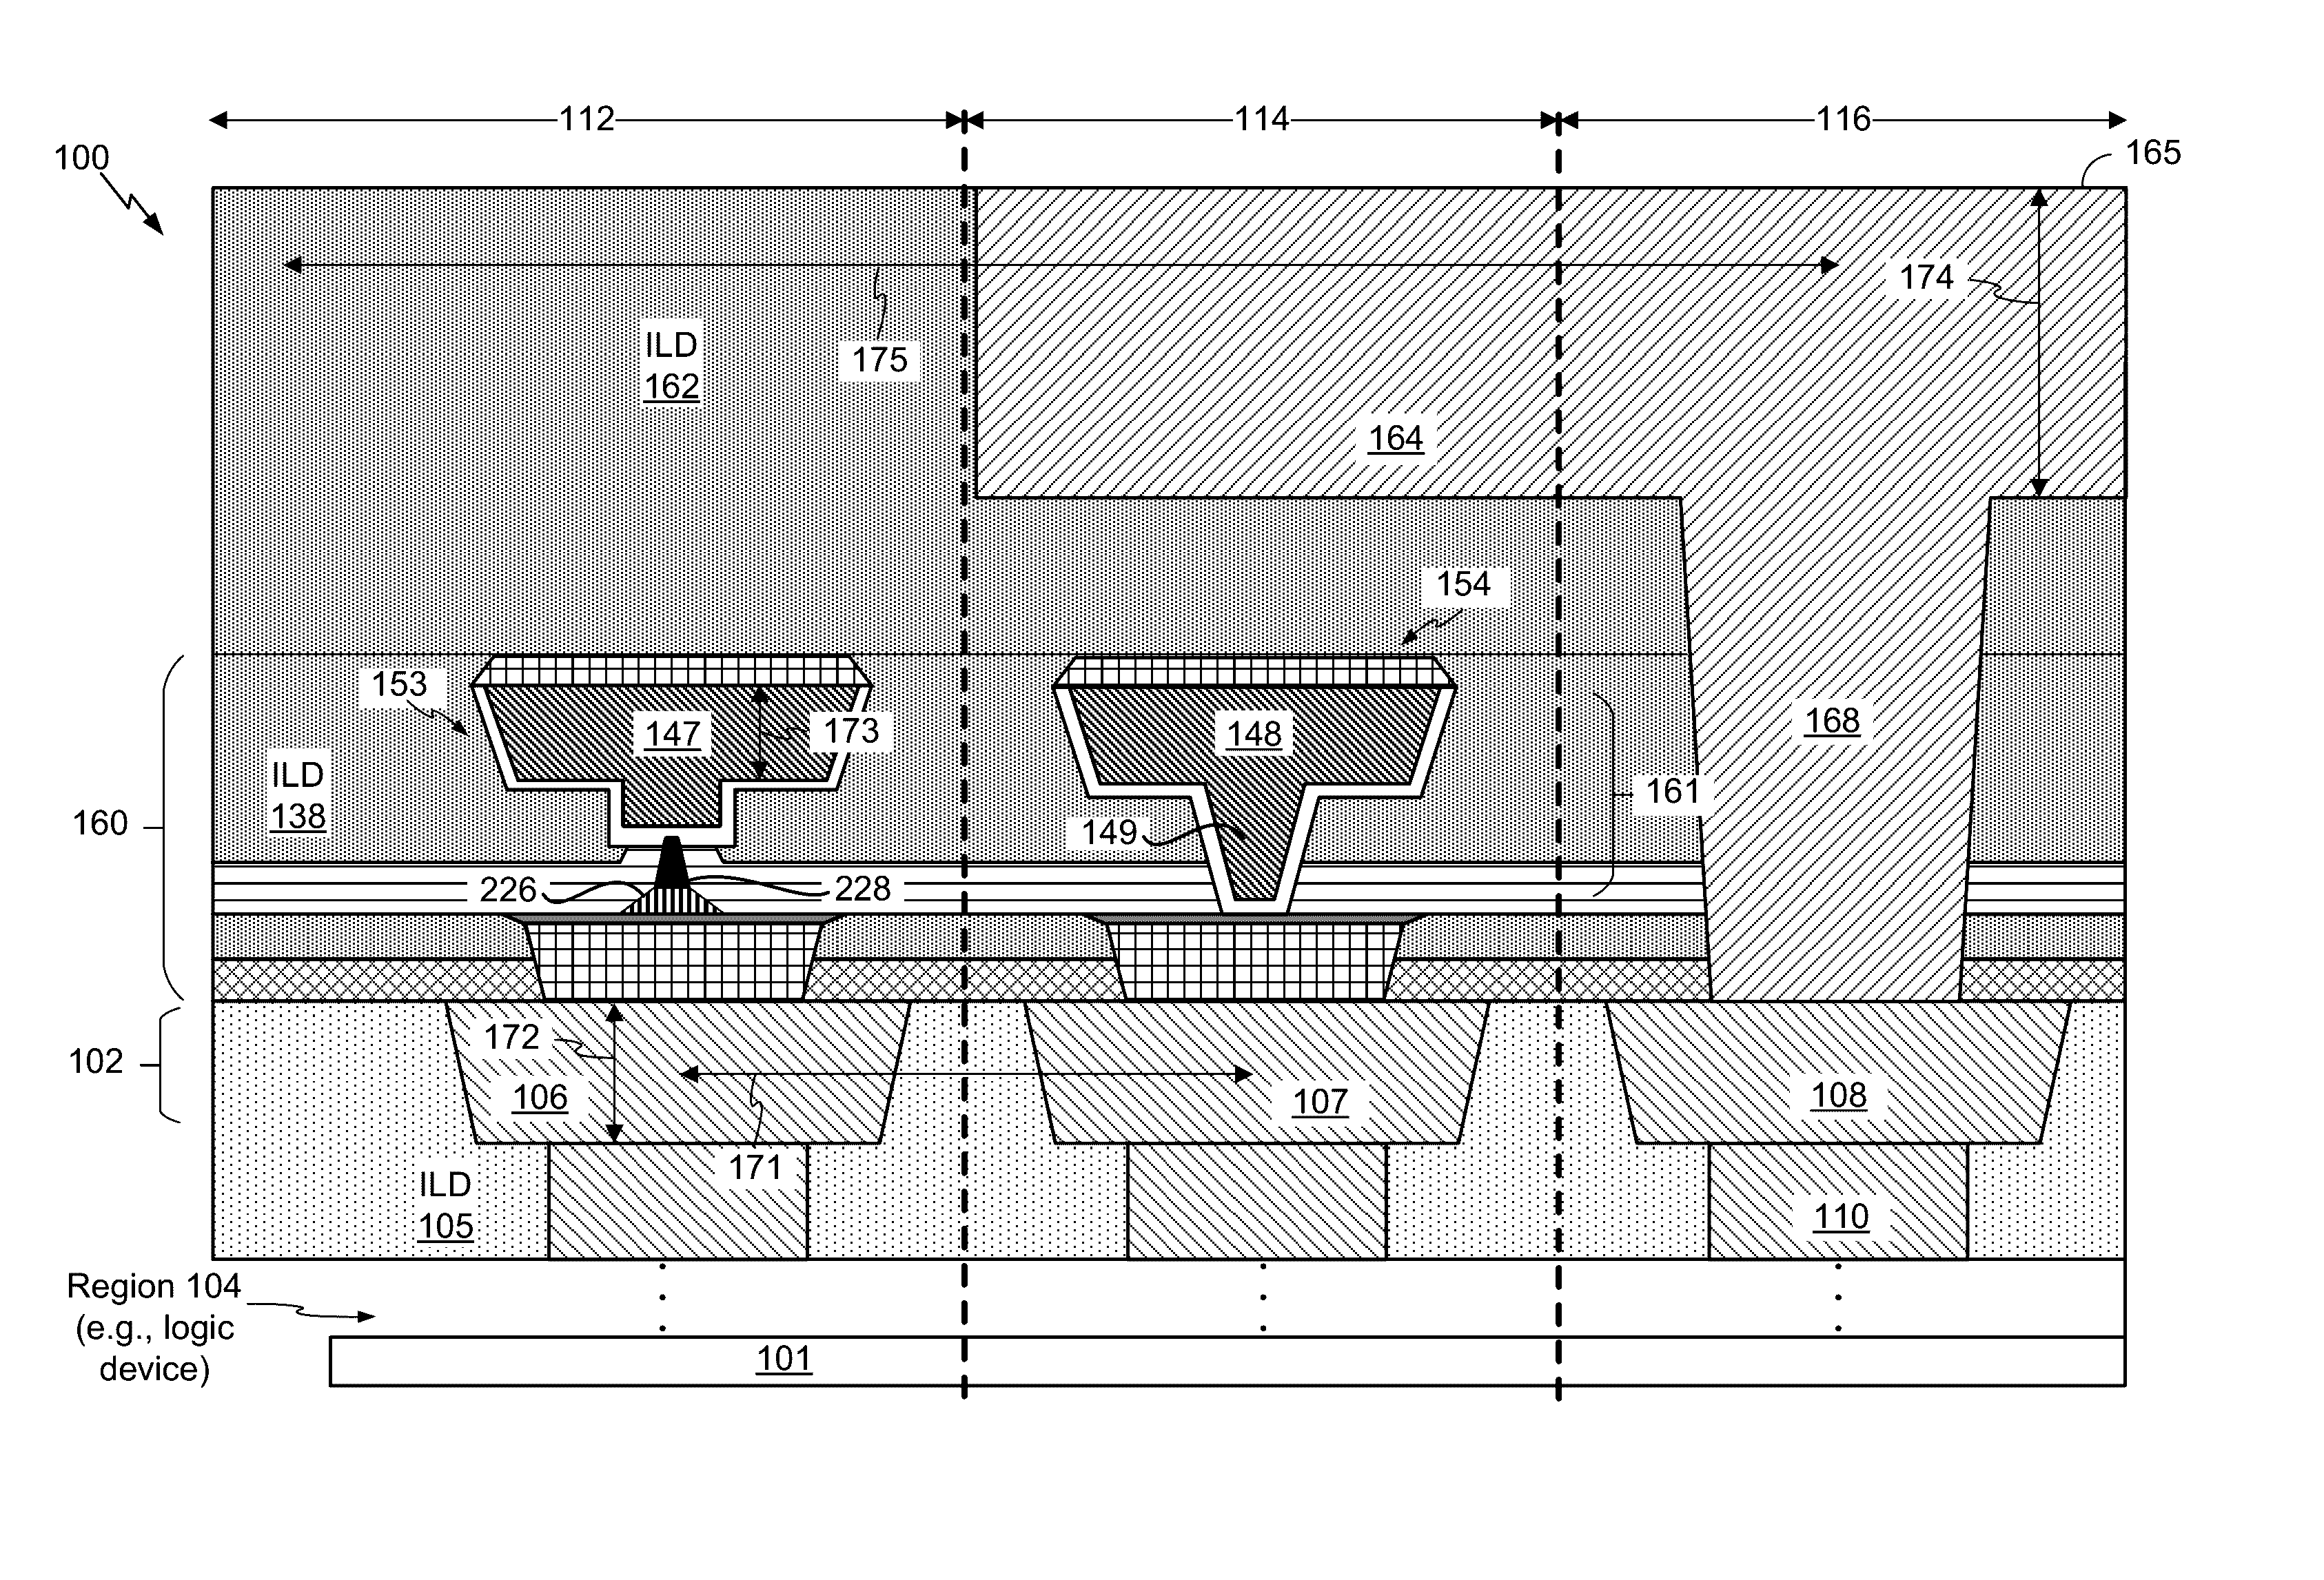 Metallization process for a memory device